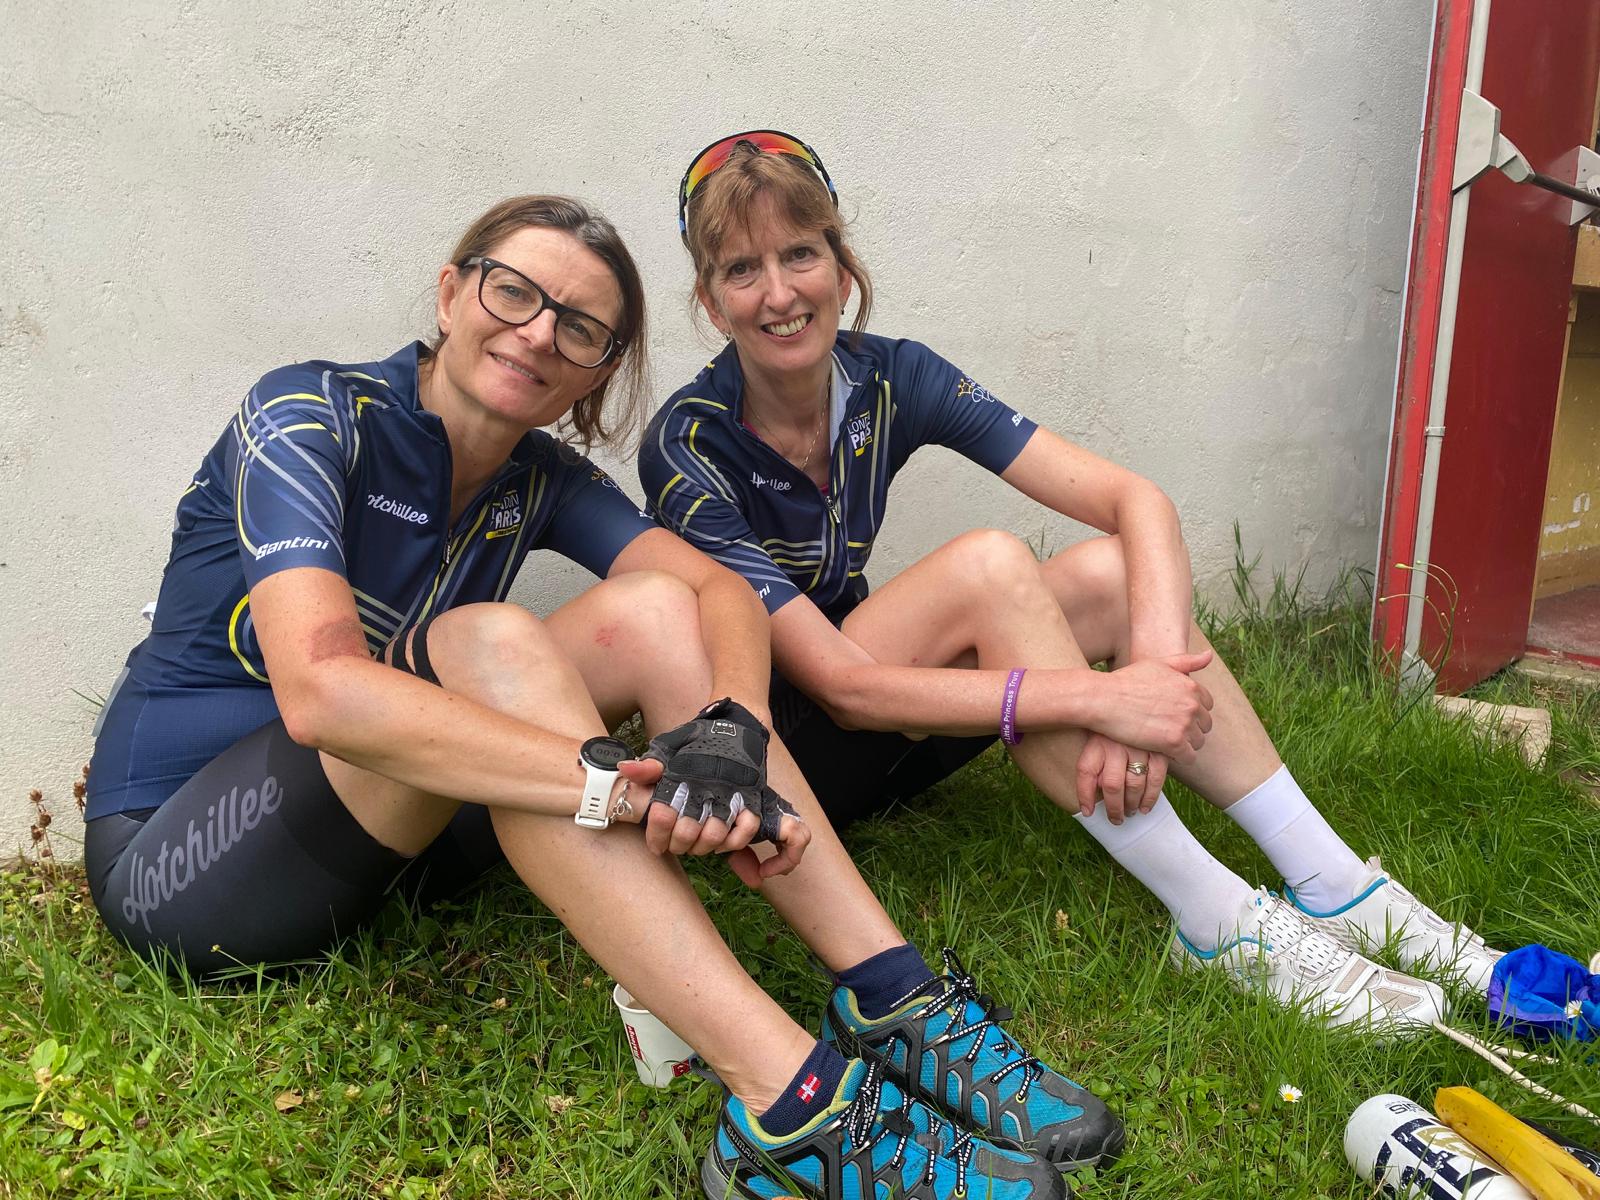 Professor Kearns and Adele Nash, a Supporter Services Assistant at The Little Princess Trust, take a well-earned break during the fundraising ride to France.